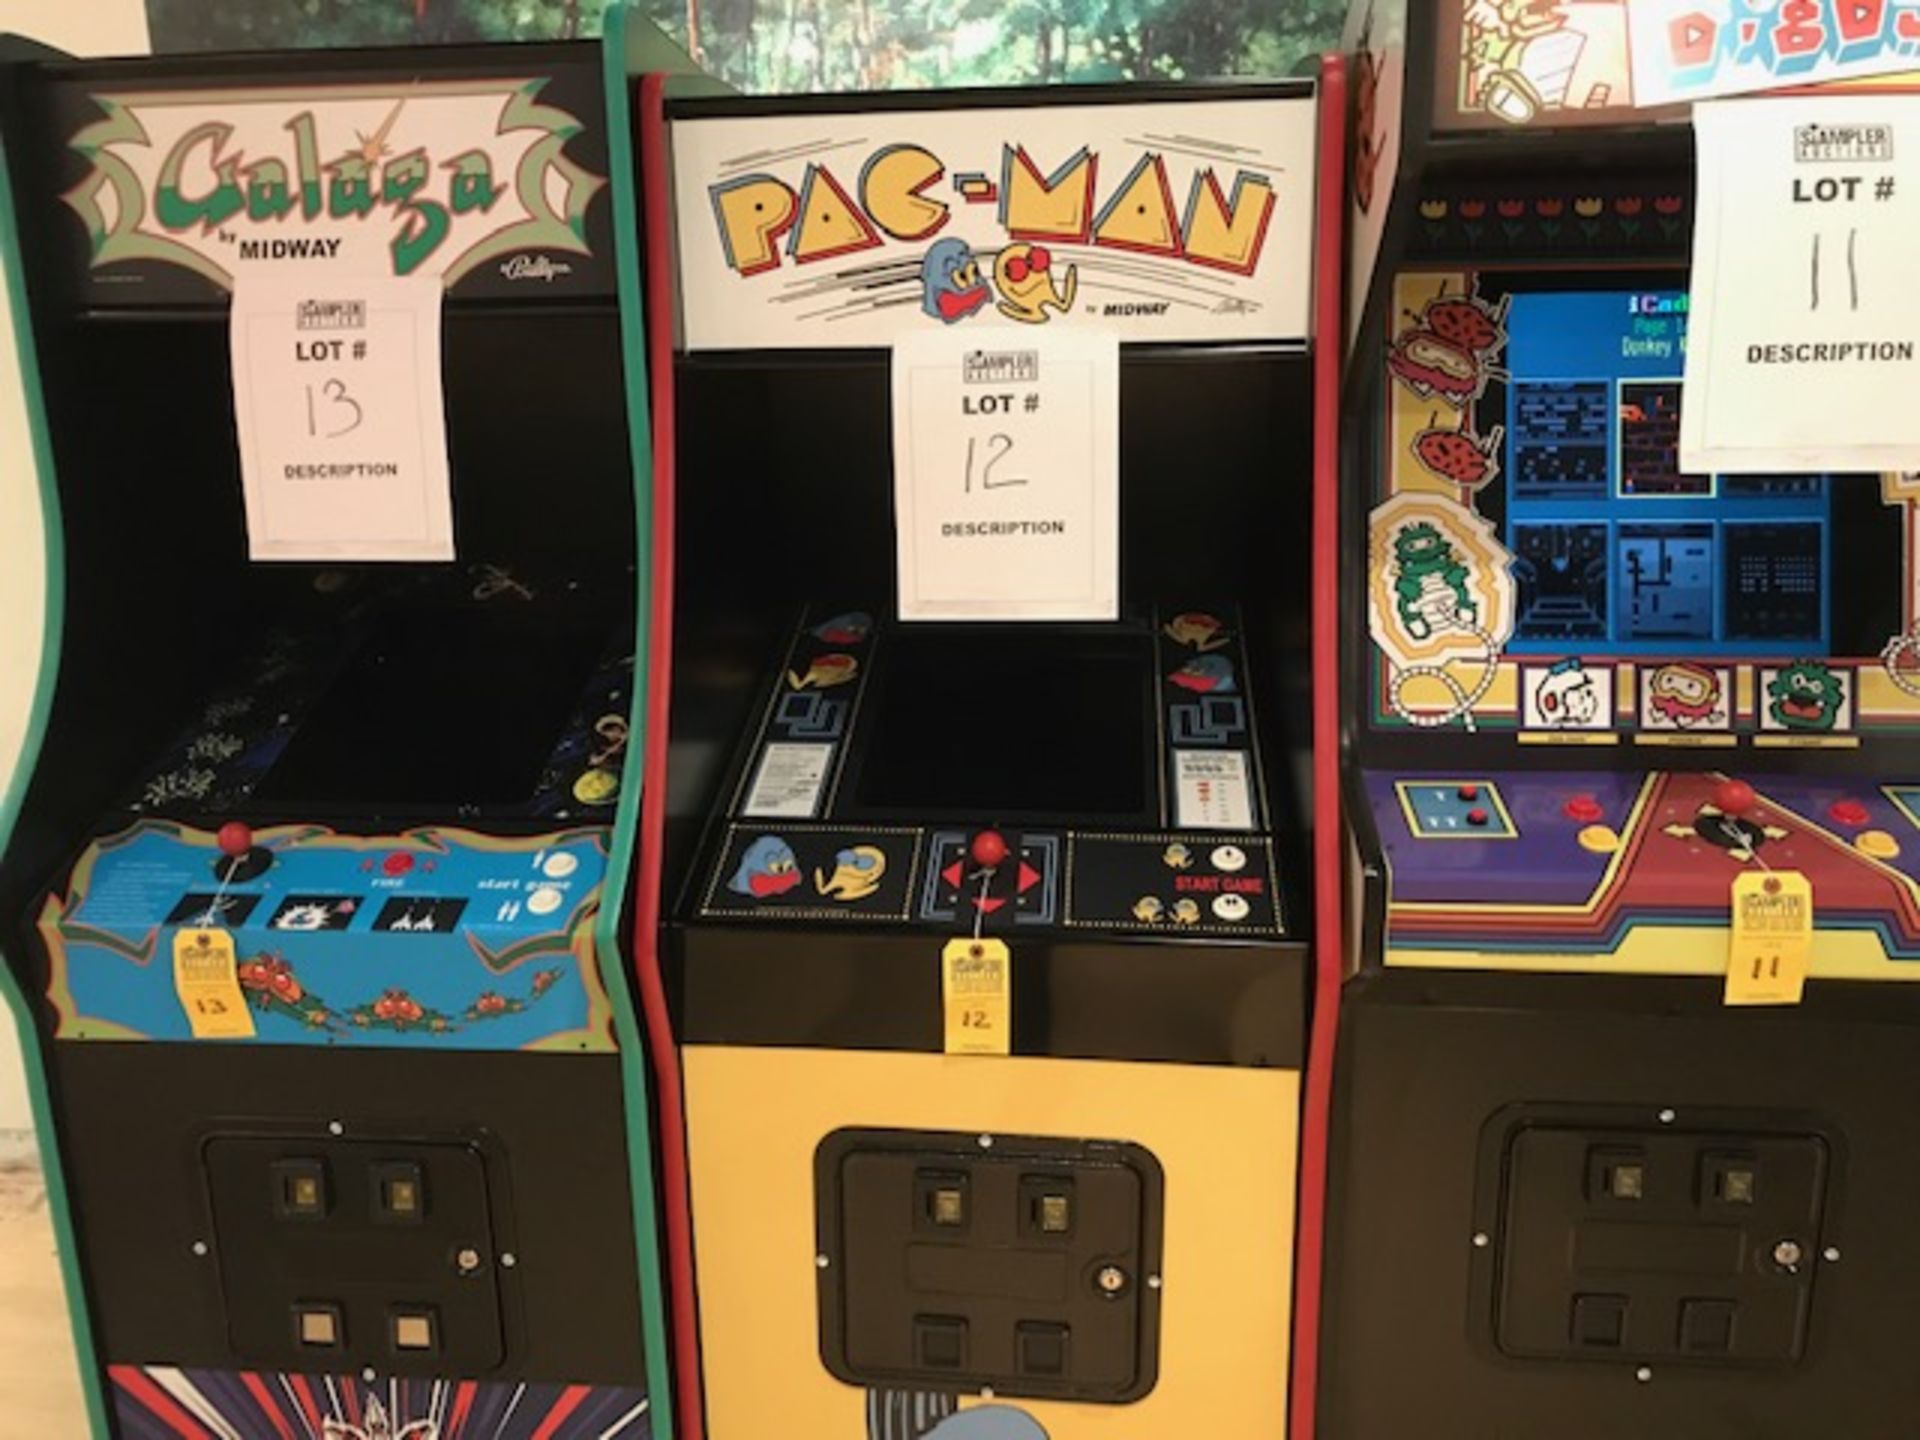 MIDWAY PAC-MAN VIDEO GAME